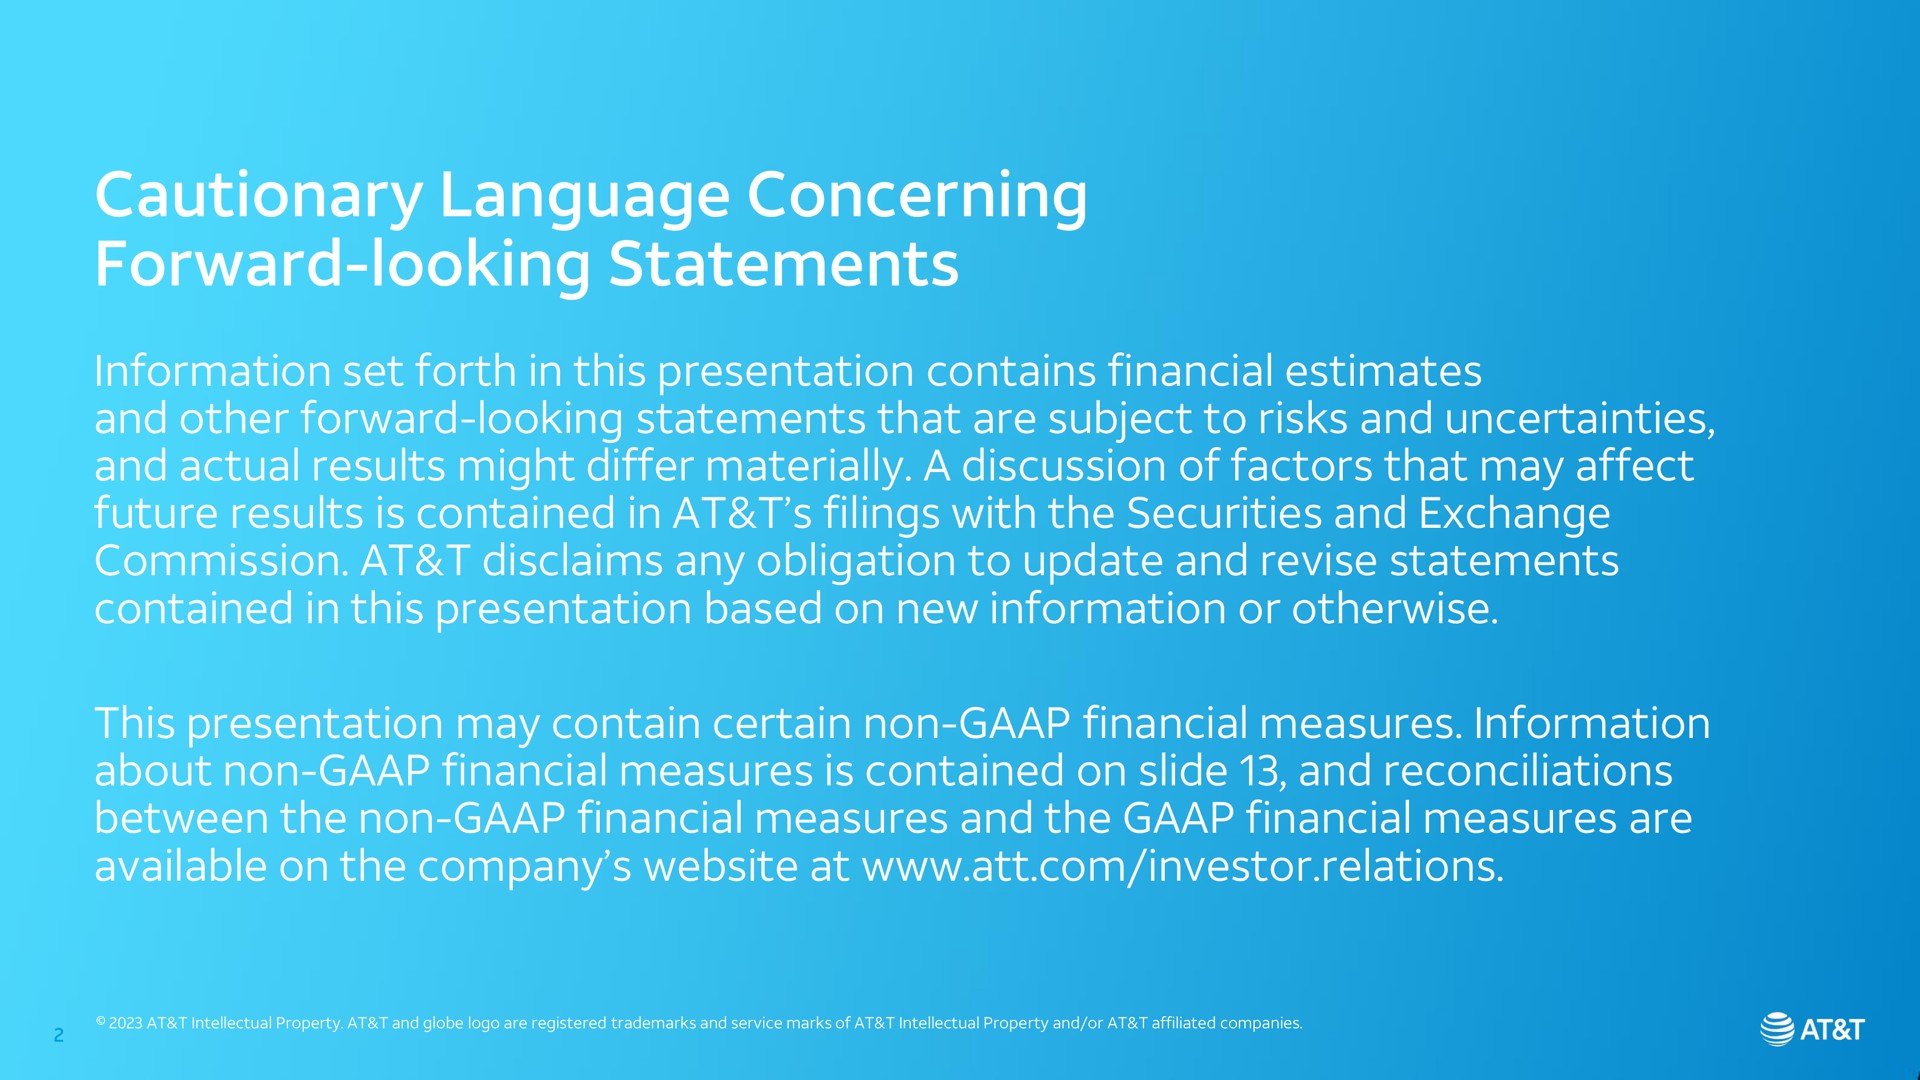 cautionary language concerning forward looking statements information set forth in this presentation contains financial estimates and other forward looking statements that are subject to risks and uncertainties and actual results might differ materially a discussion of factors that may affect future results is contained in at filings with the securities and exchange commission at disclaims any obligation to update and revise statements contained in this presentation based on new information or otherwise this presentation may contain certain non financial measures information about non financial measures is contained on slide and reconciliations between the non financial measures and the financial measures are available on the company at investor relations | AT&T